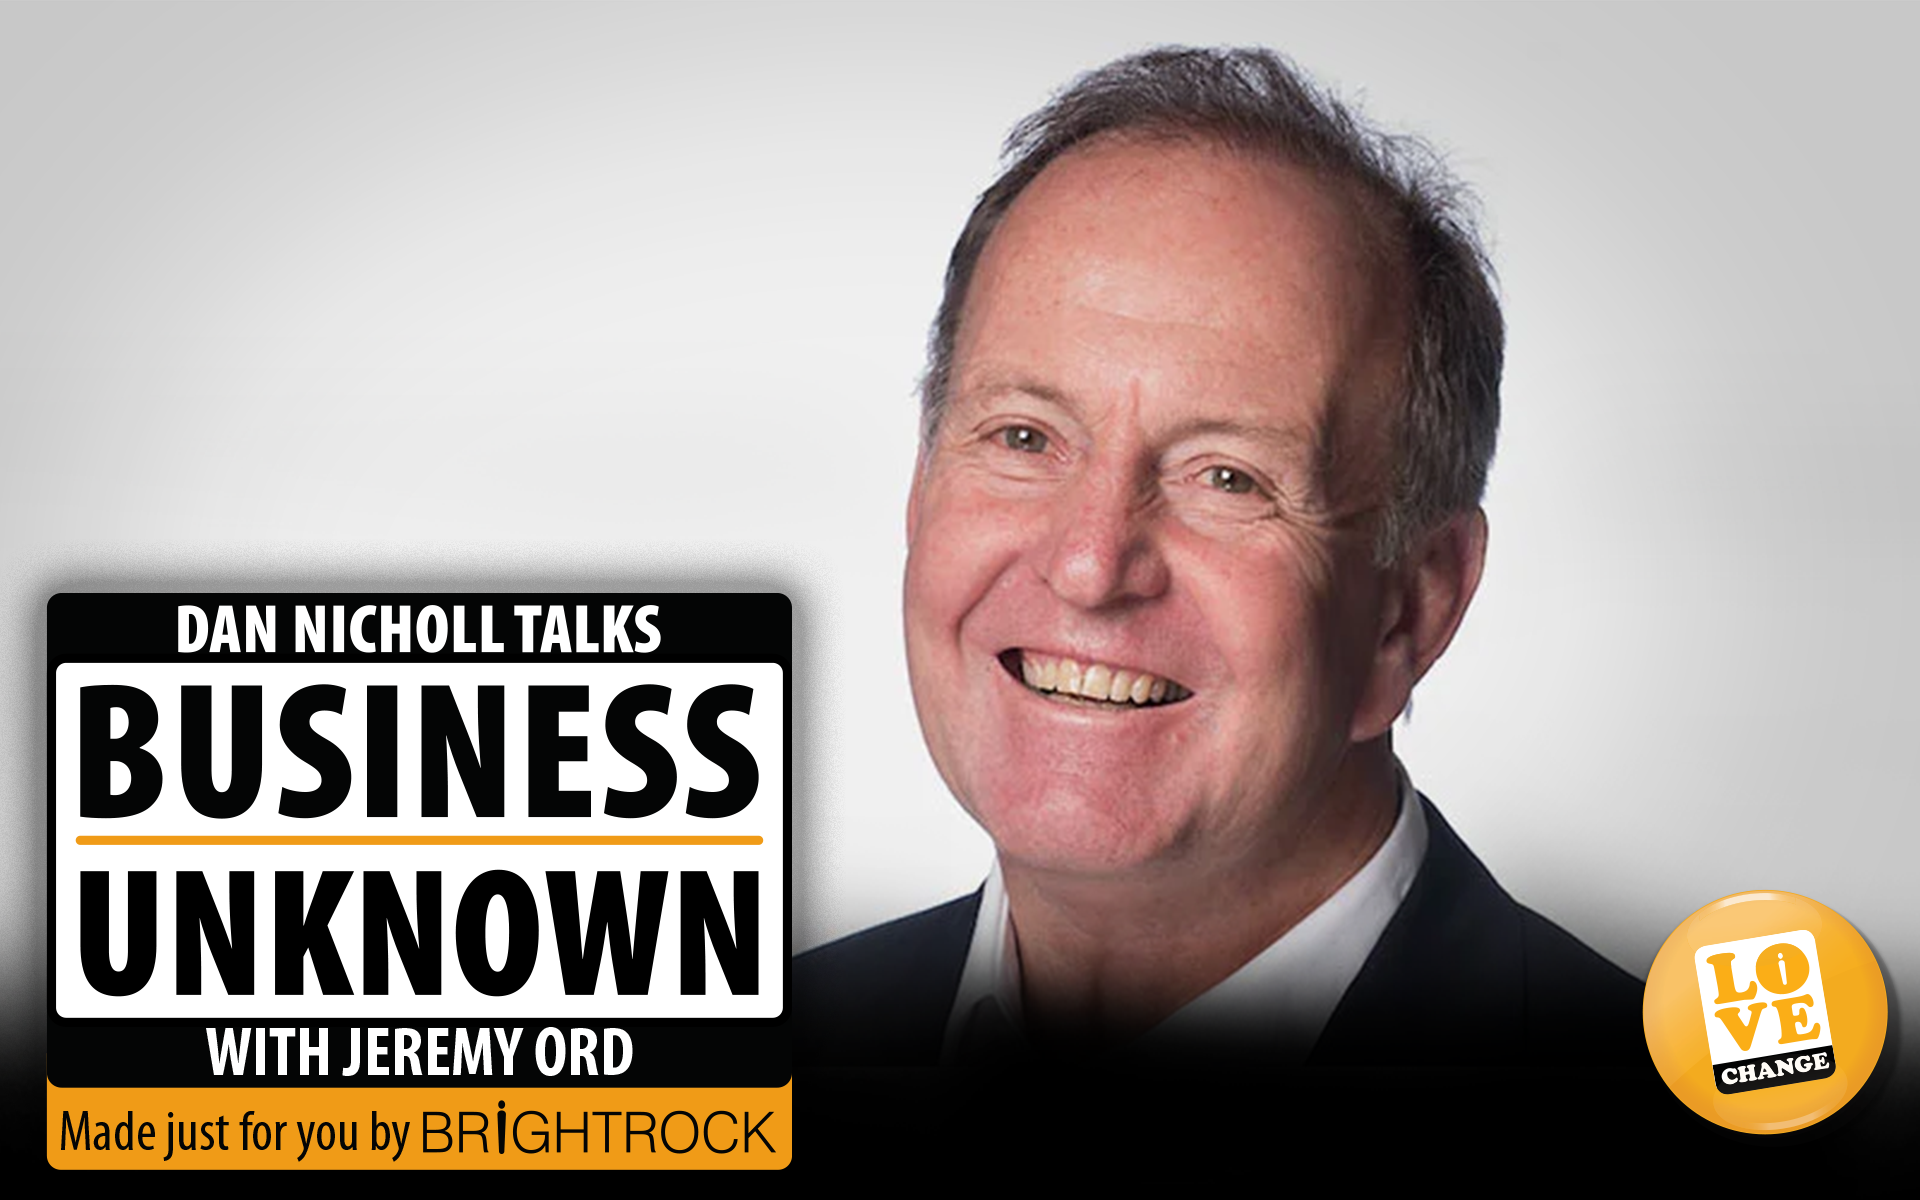 Business Unknown Episode 6 with Jeremy Ord